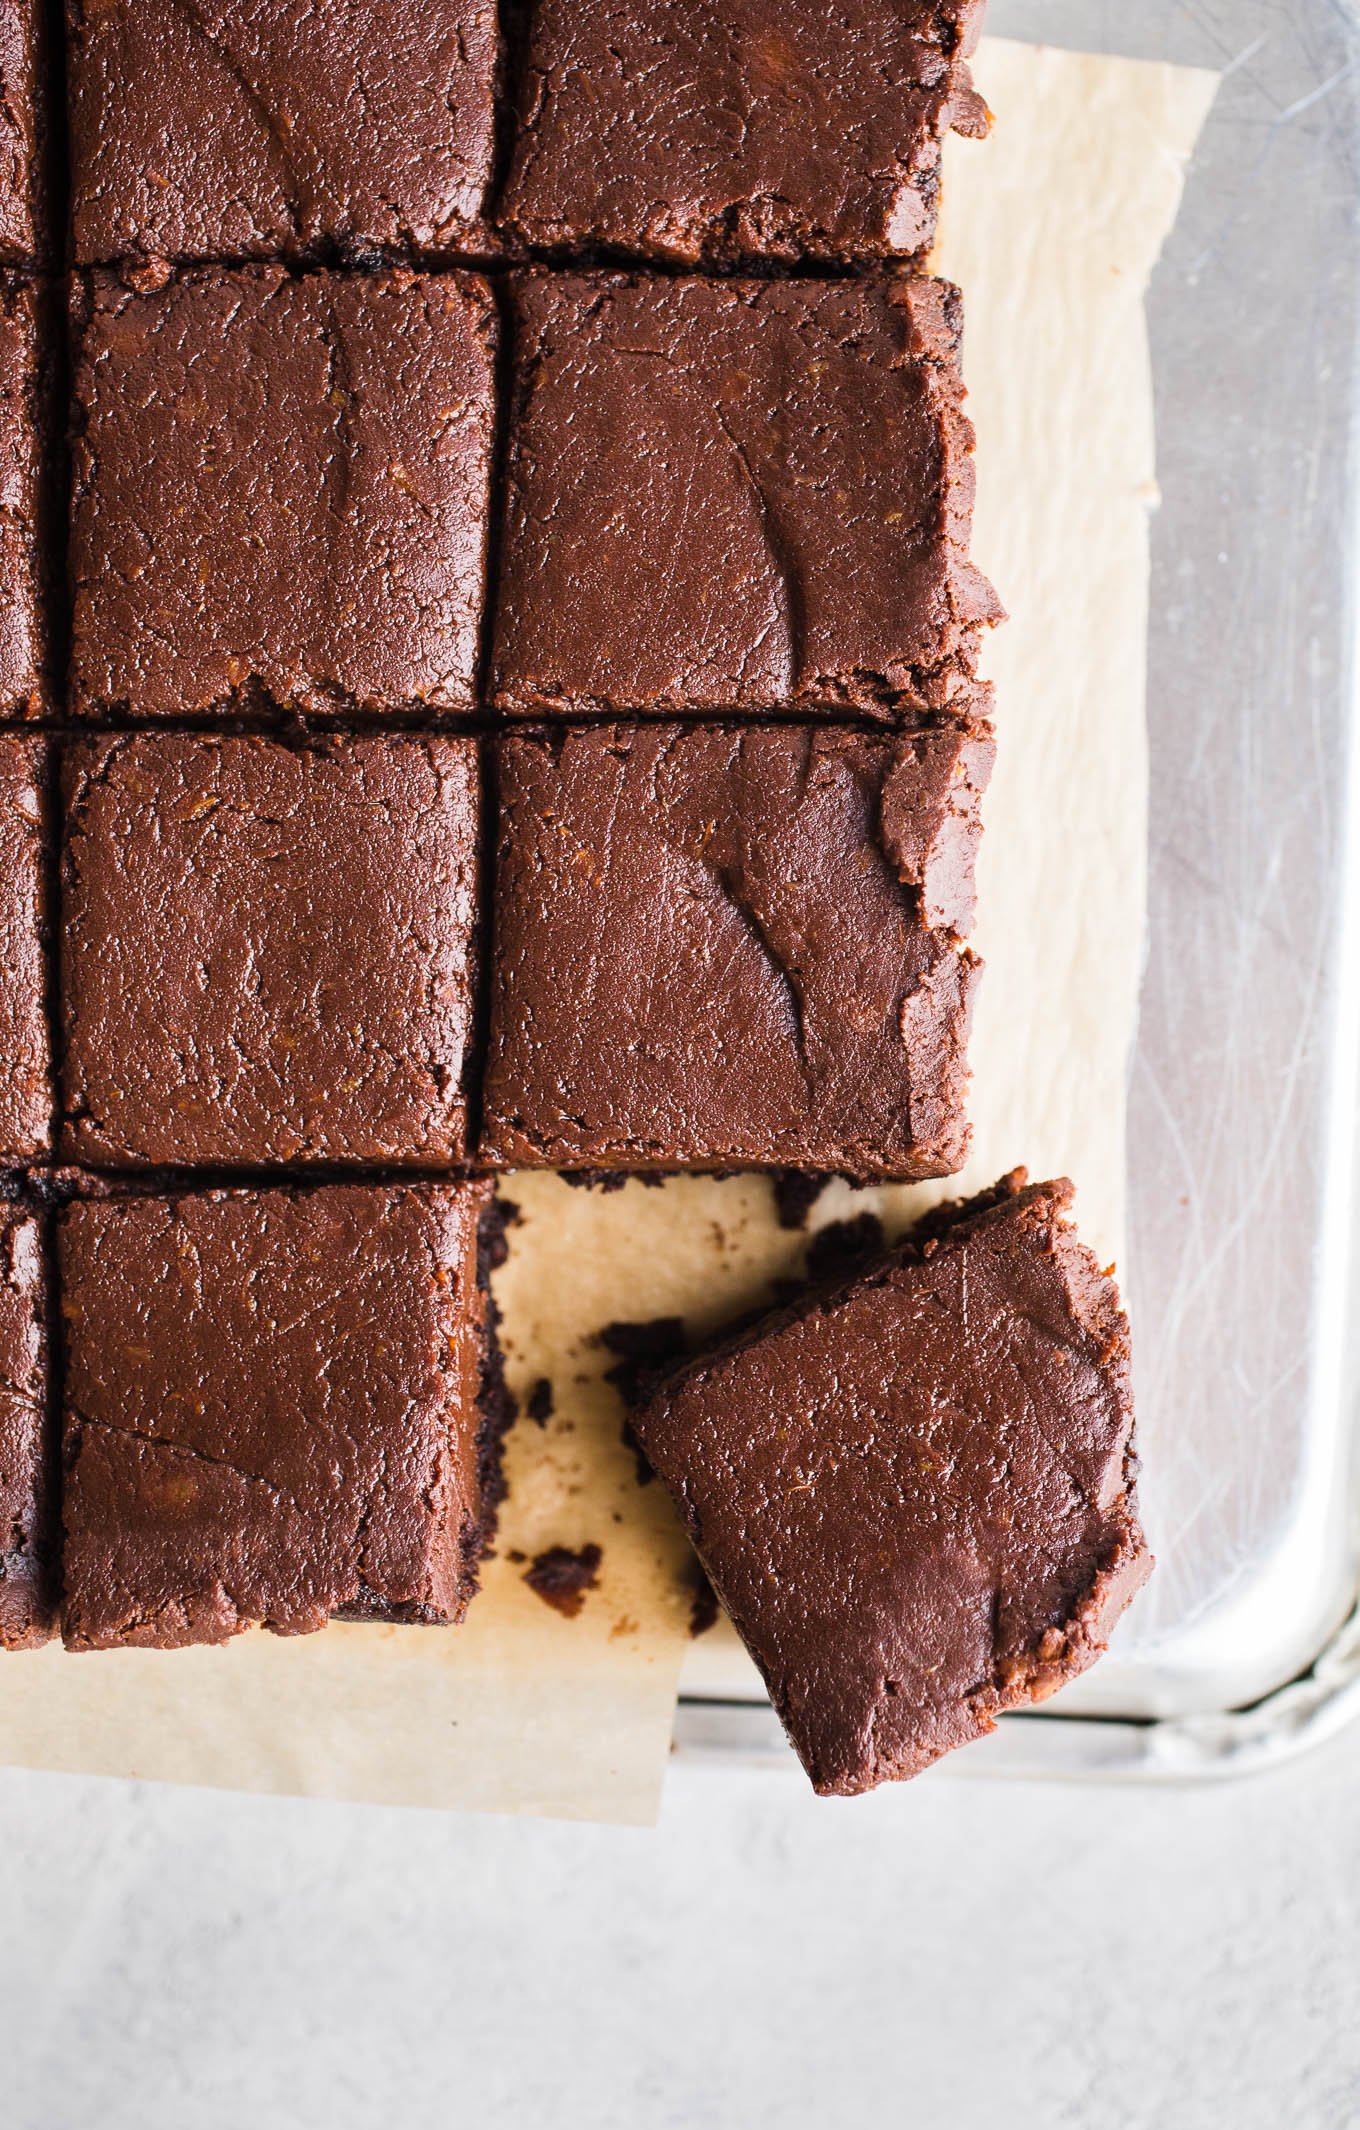 Frosted brownies on a piece of parchment paper.